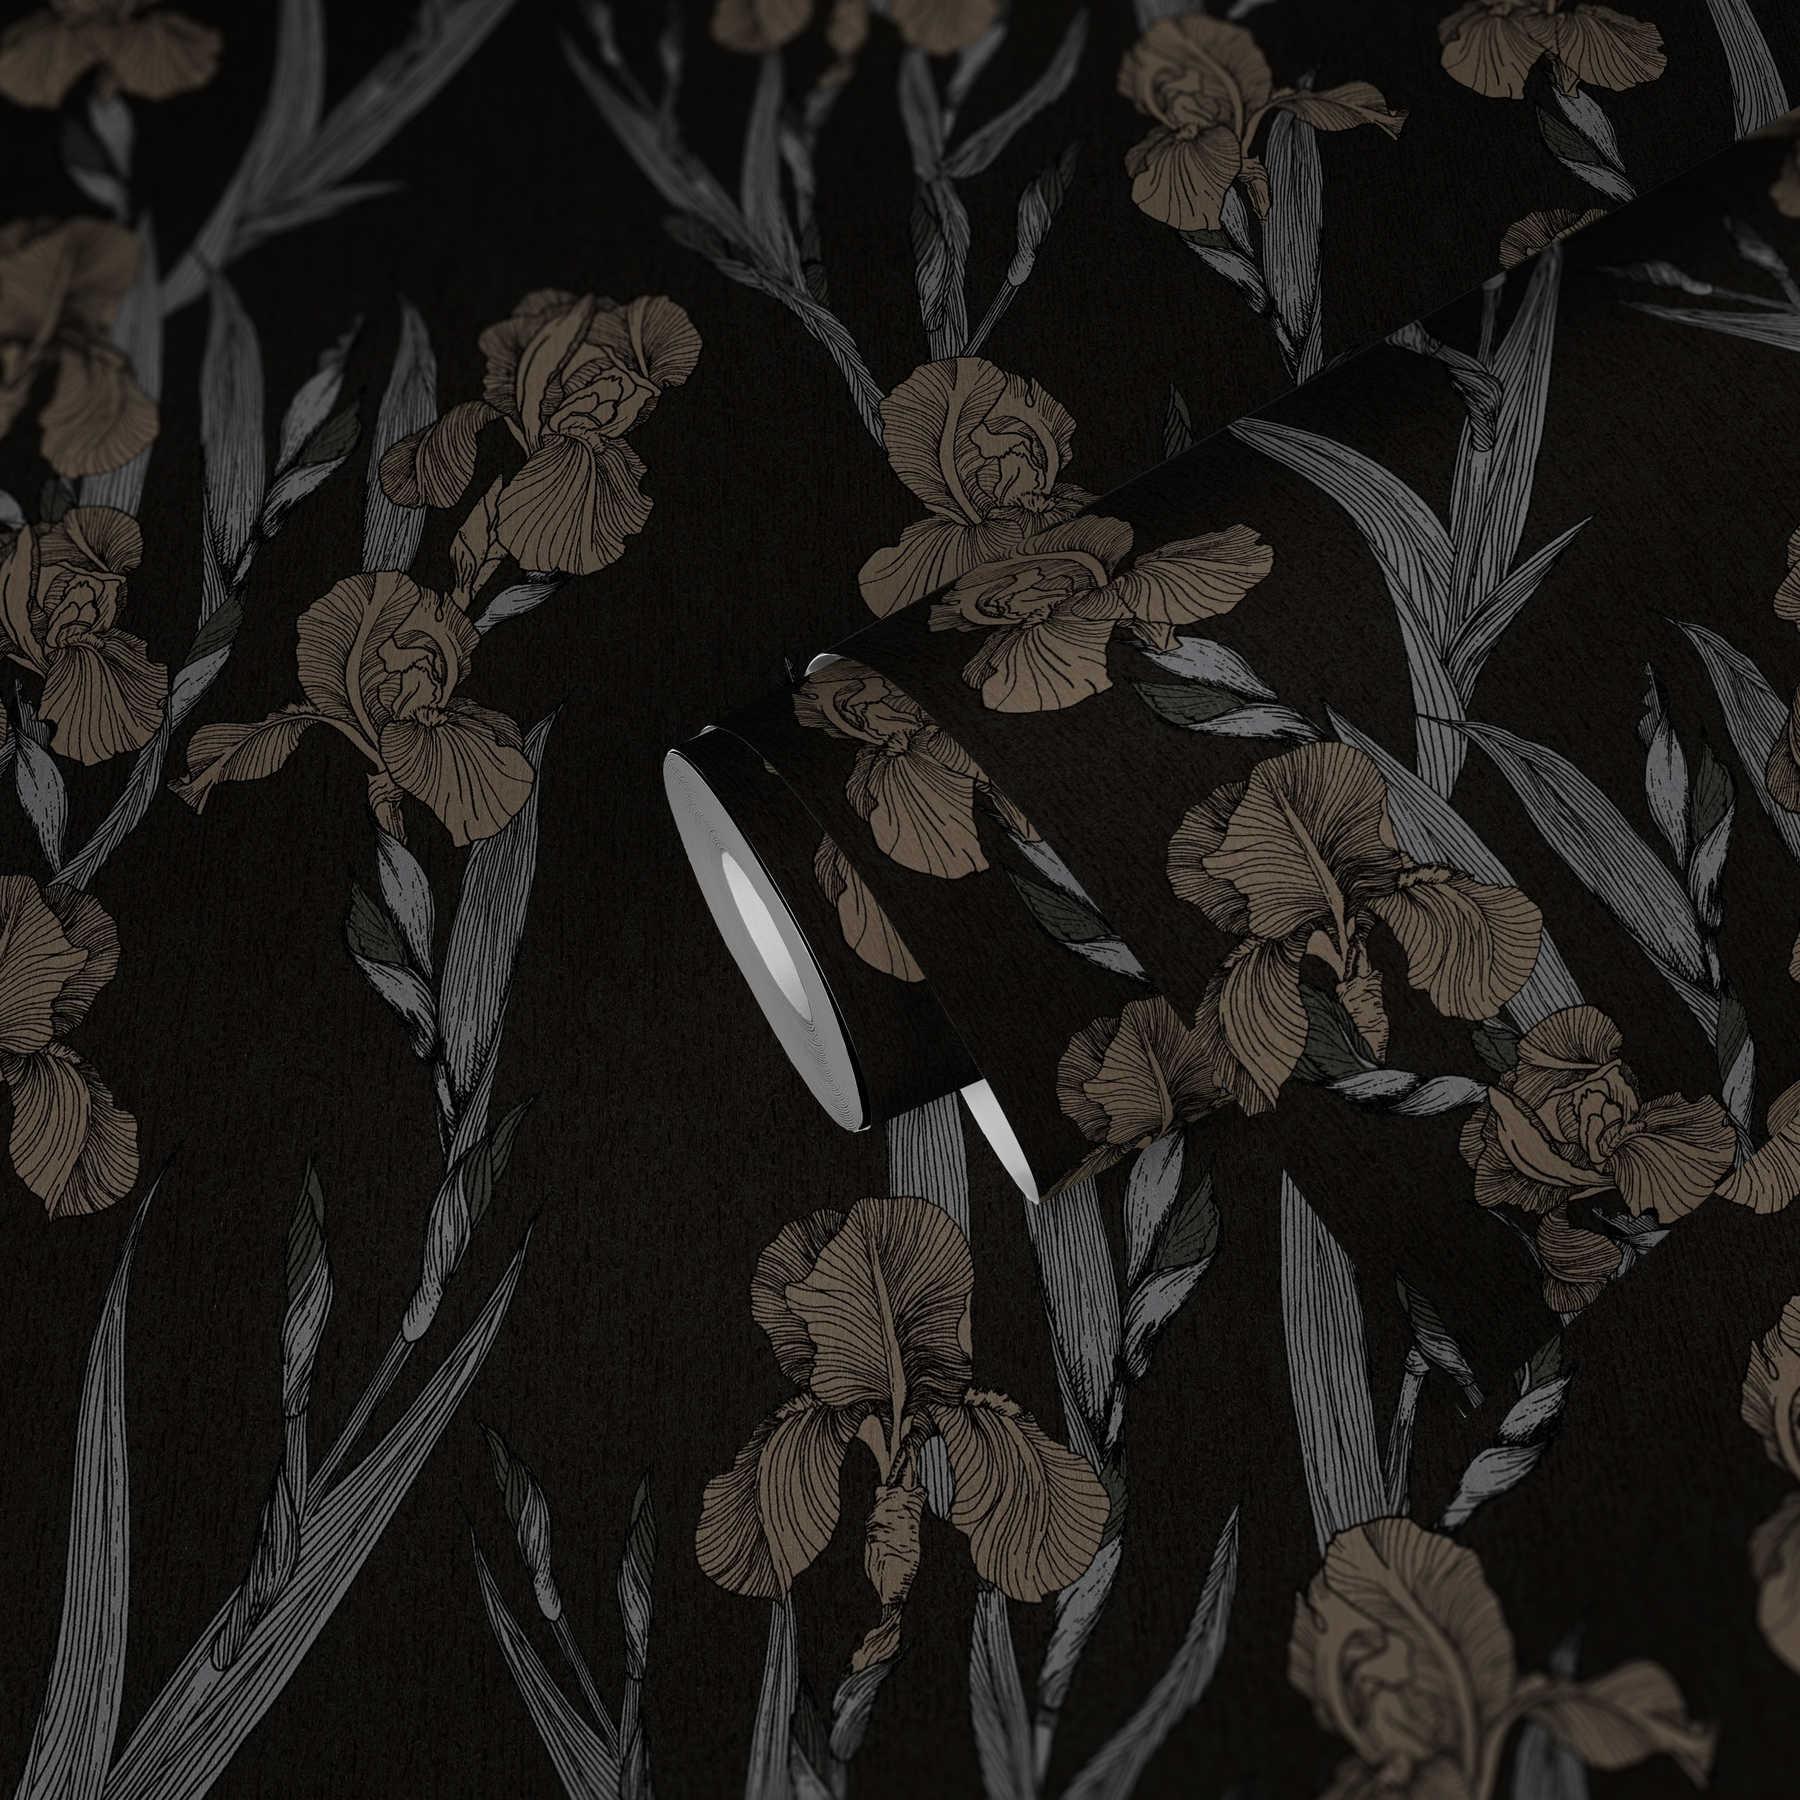             Floral pattern wallpaper with flowers in drawing style - black, grey, brown
        